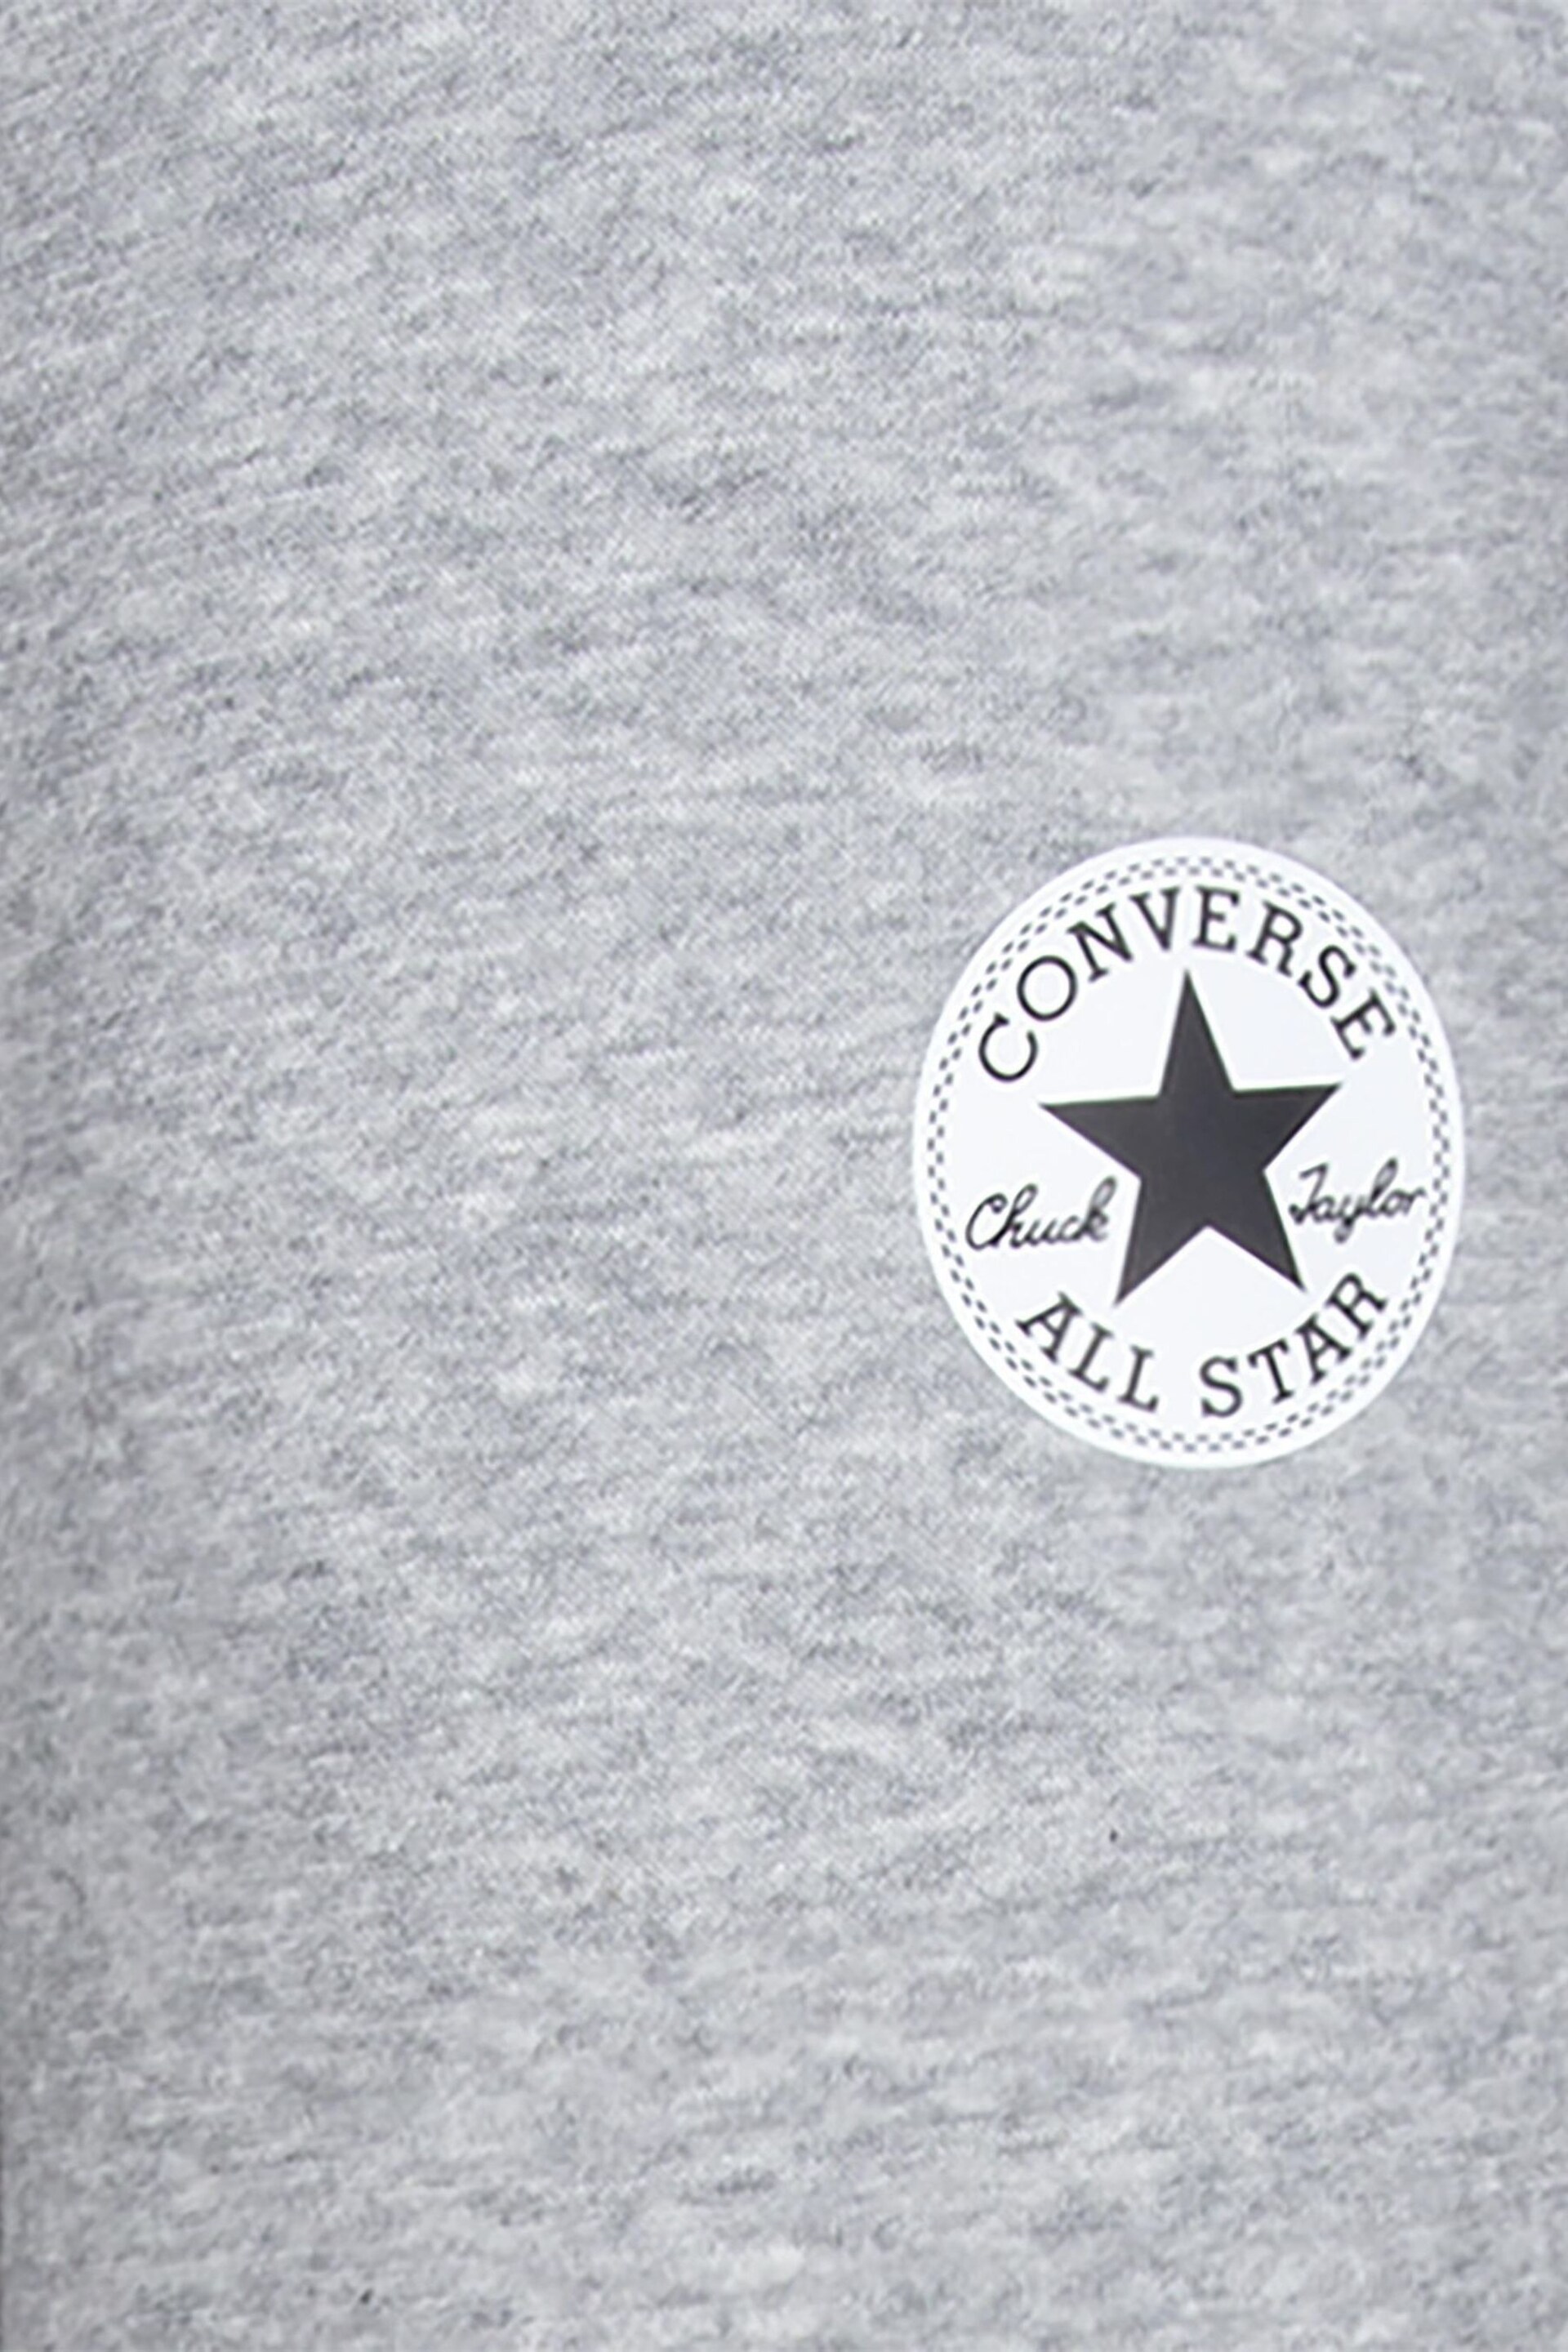 Converse Grey Signature Chuck Patch Joggers - Image 5 of 7